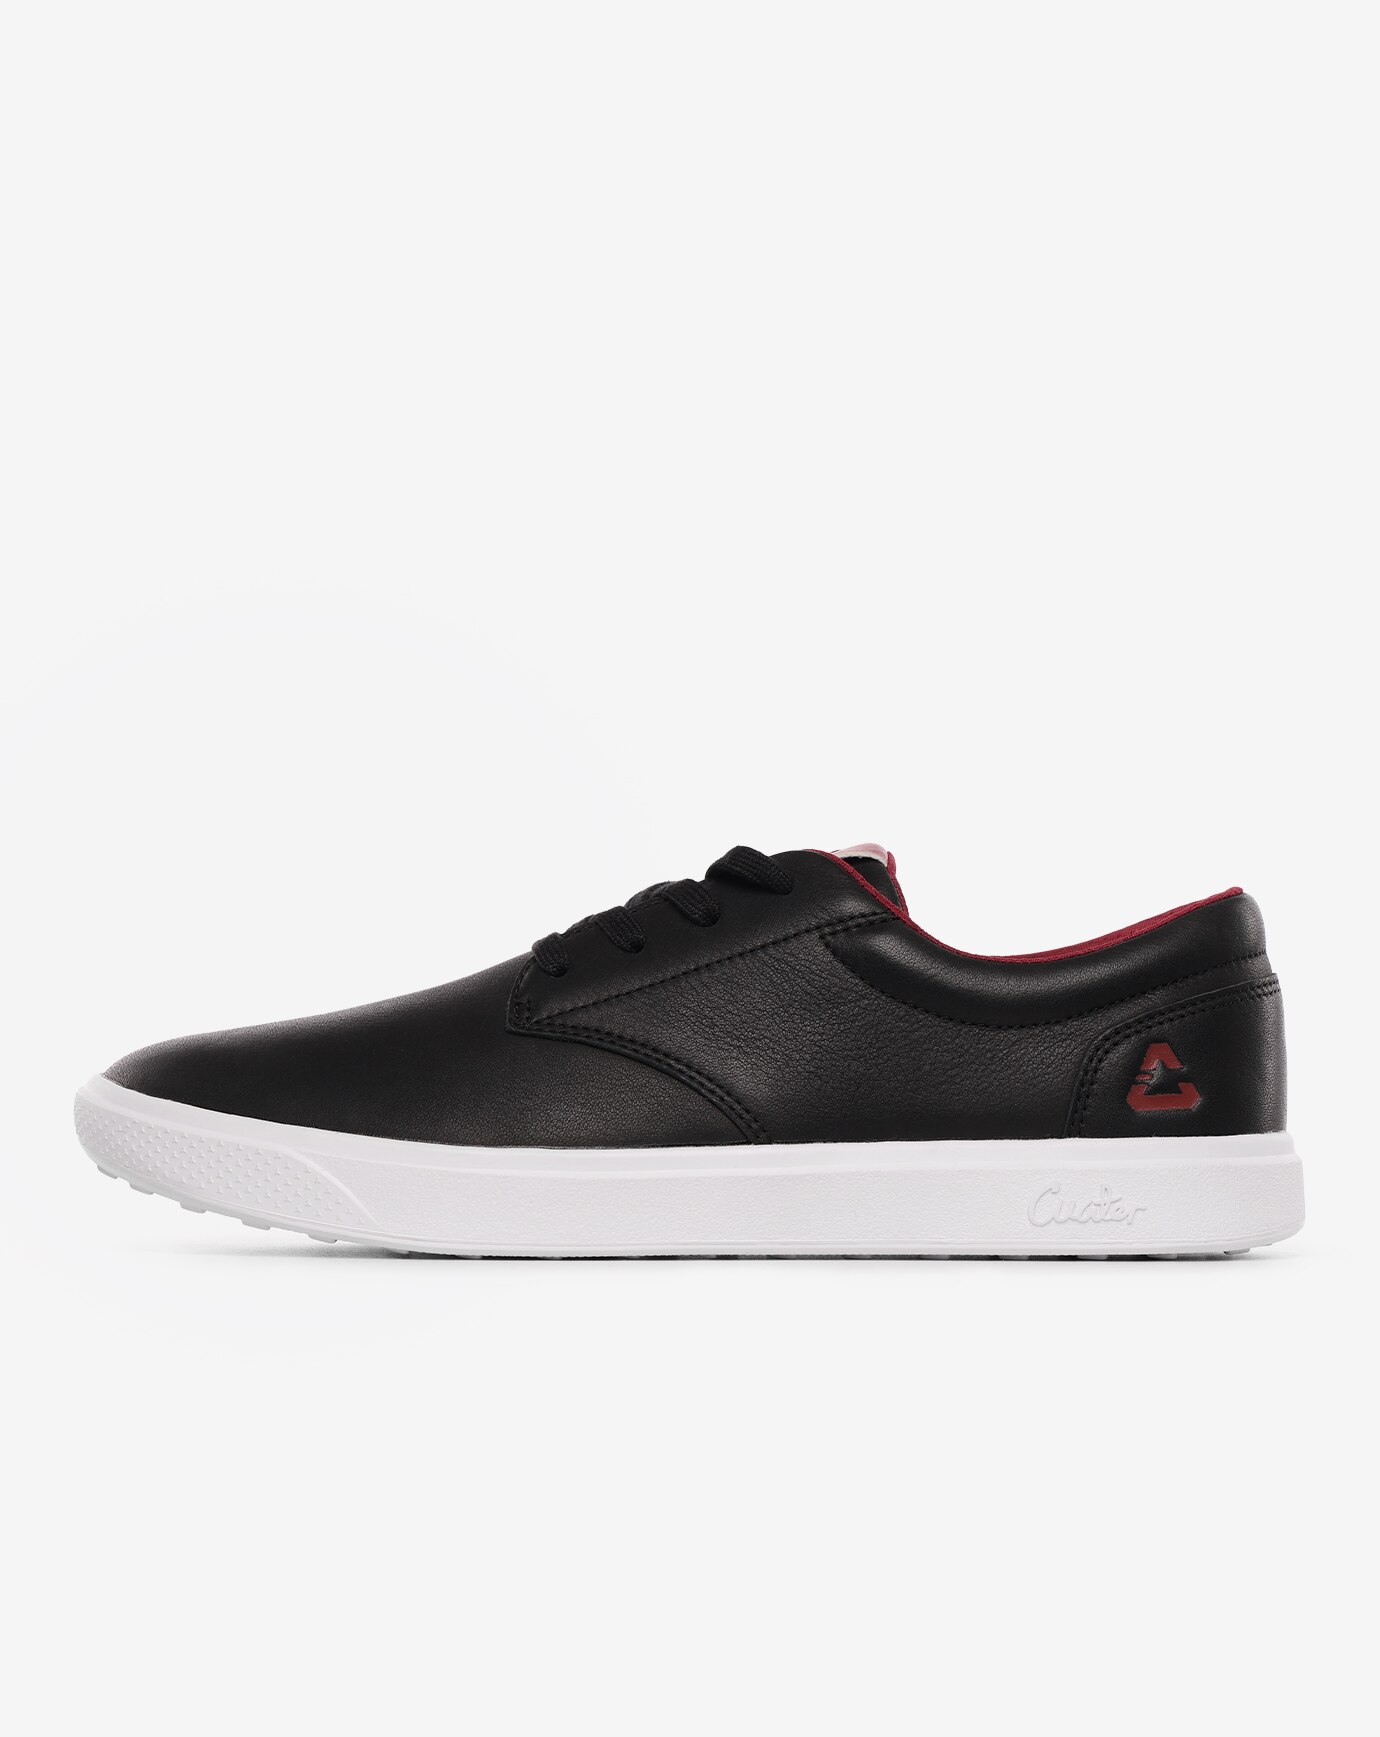 THE WILDCARD LEATHER SPIKELESS GOLF SHOE 1